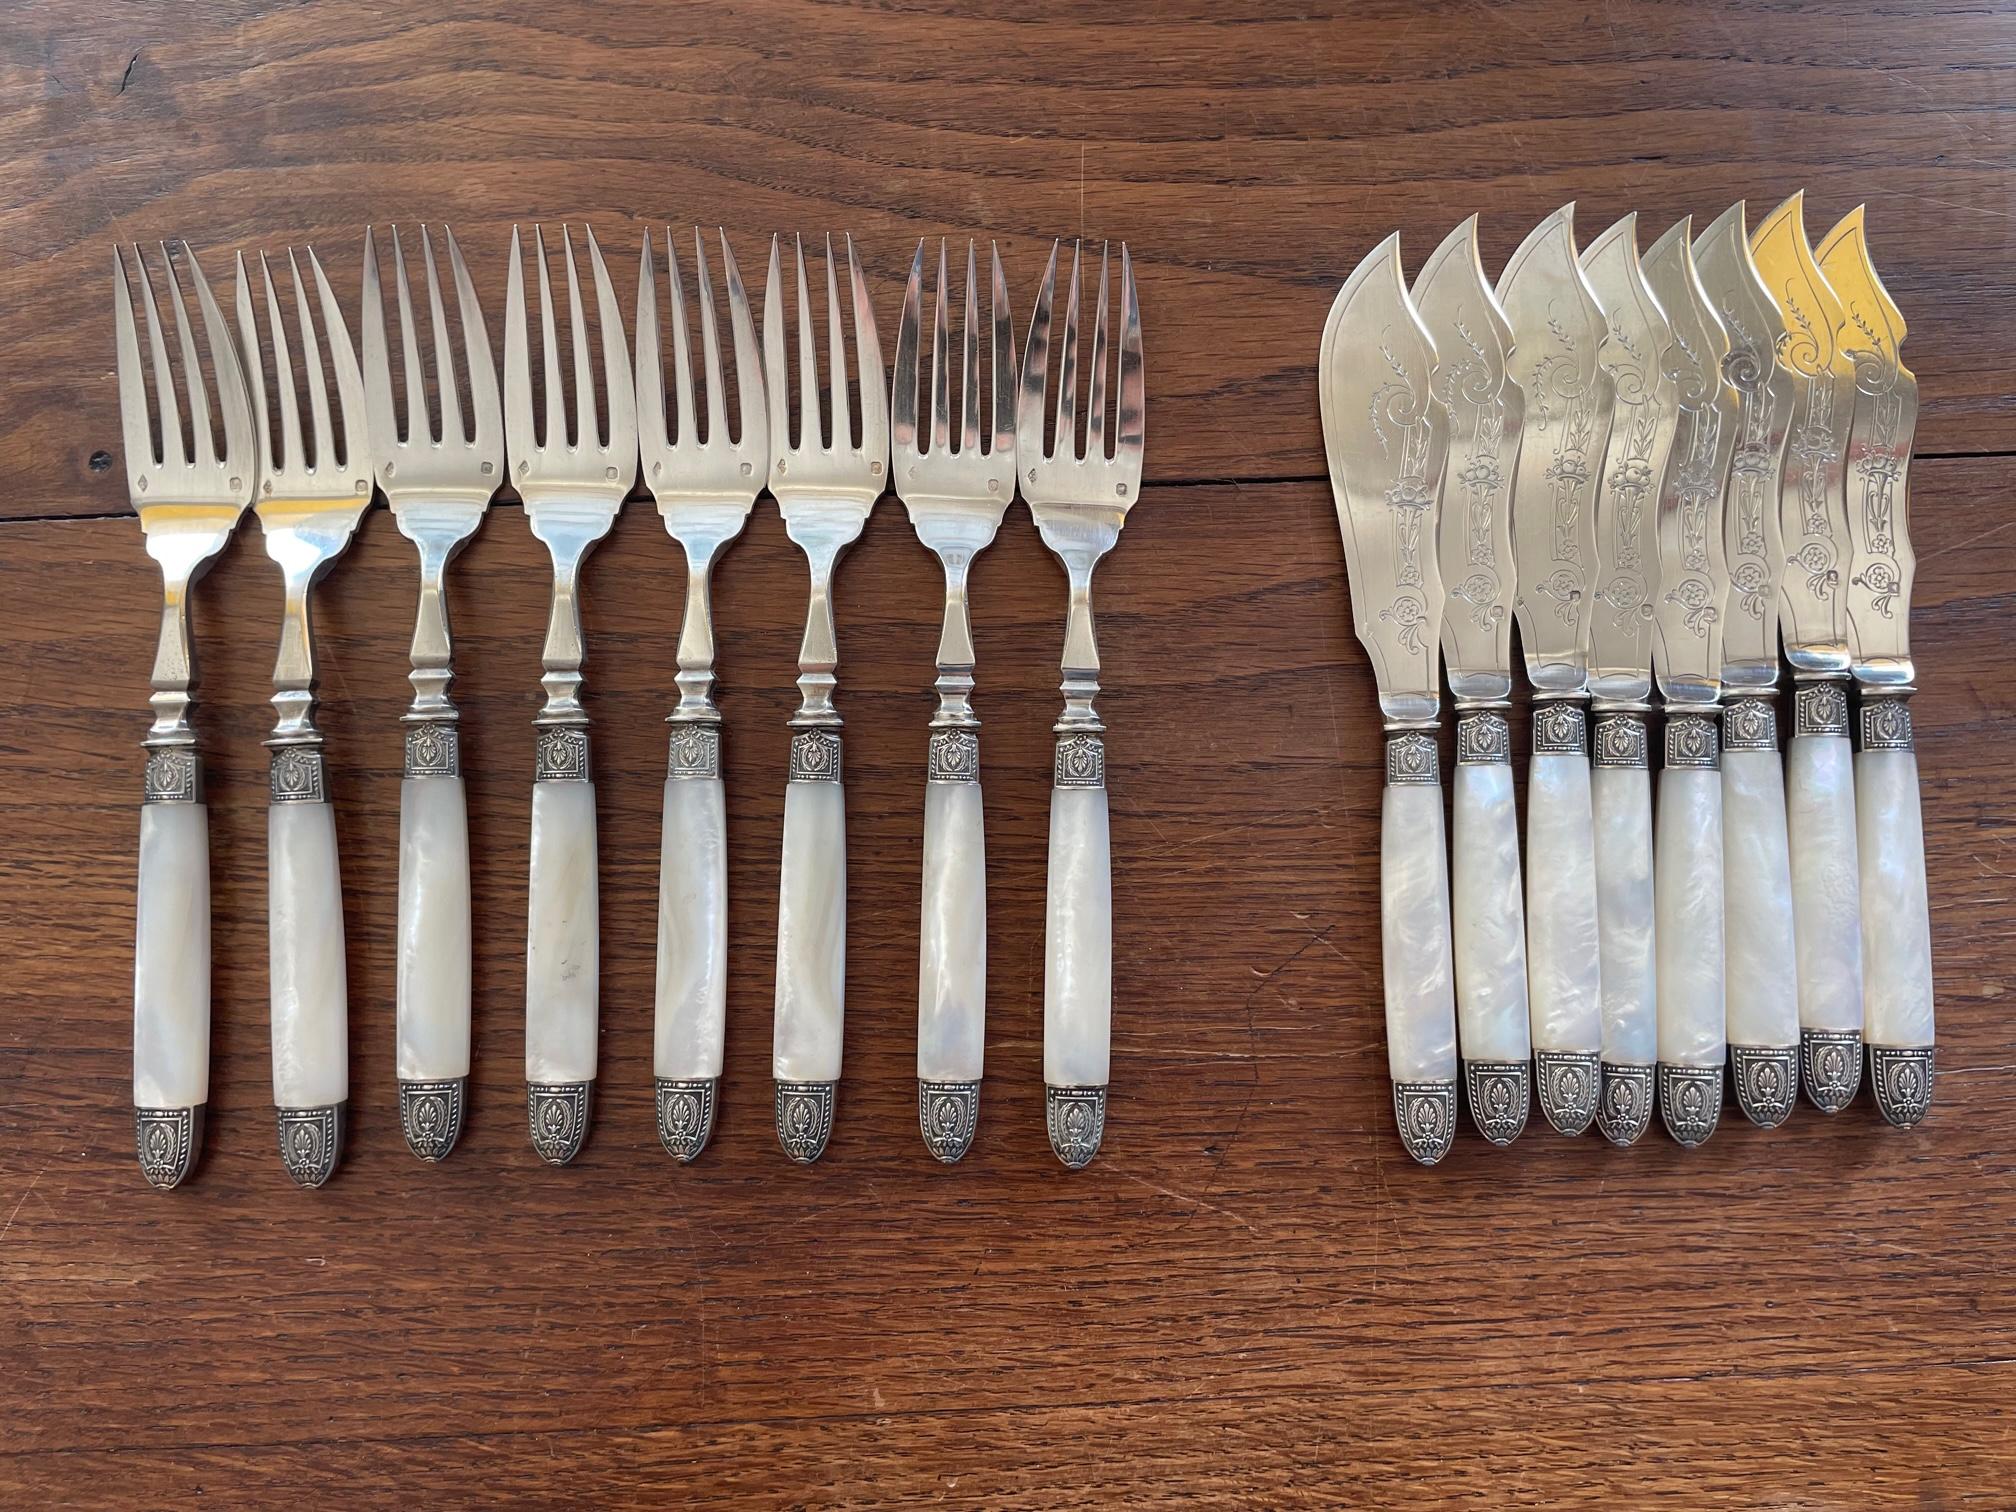 Beautiful 19th century French Sterling silver and mother-of-pearl fish cutlery, service for 8 people. 
8 Forks and 8 knives. French punch (minerve) and Stamp R&C of the silversmith. 
The handles are in mother-of-pearl. Very good condition and